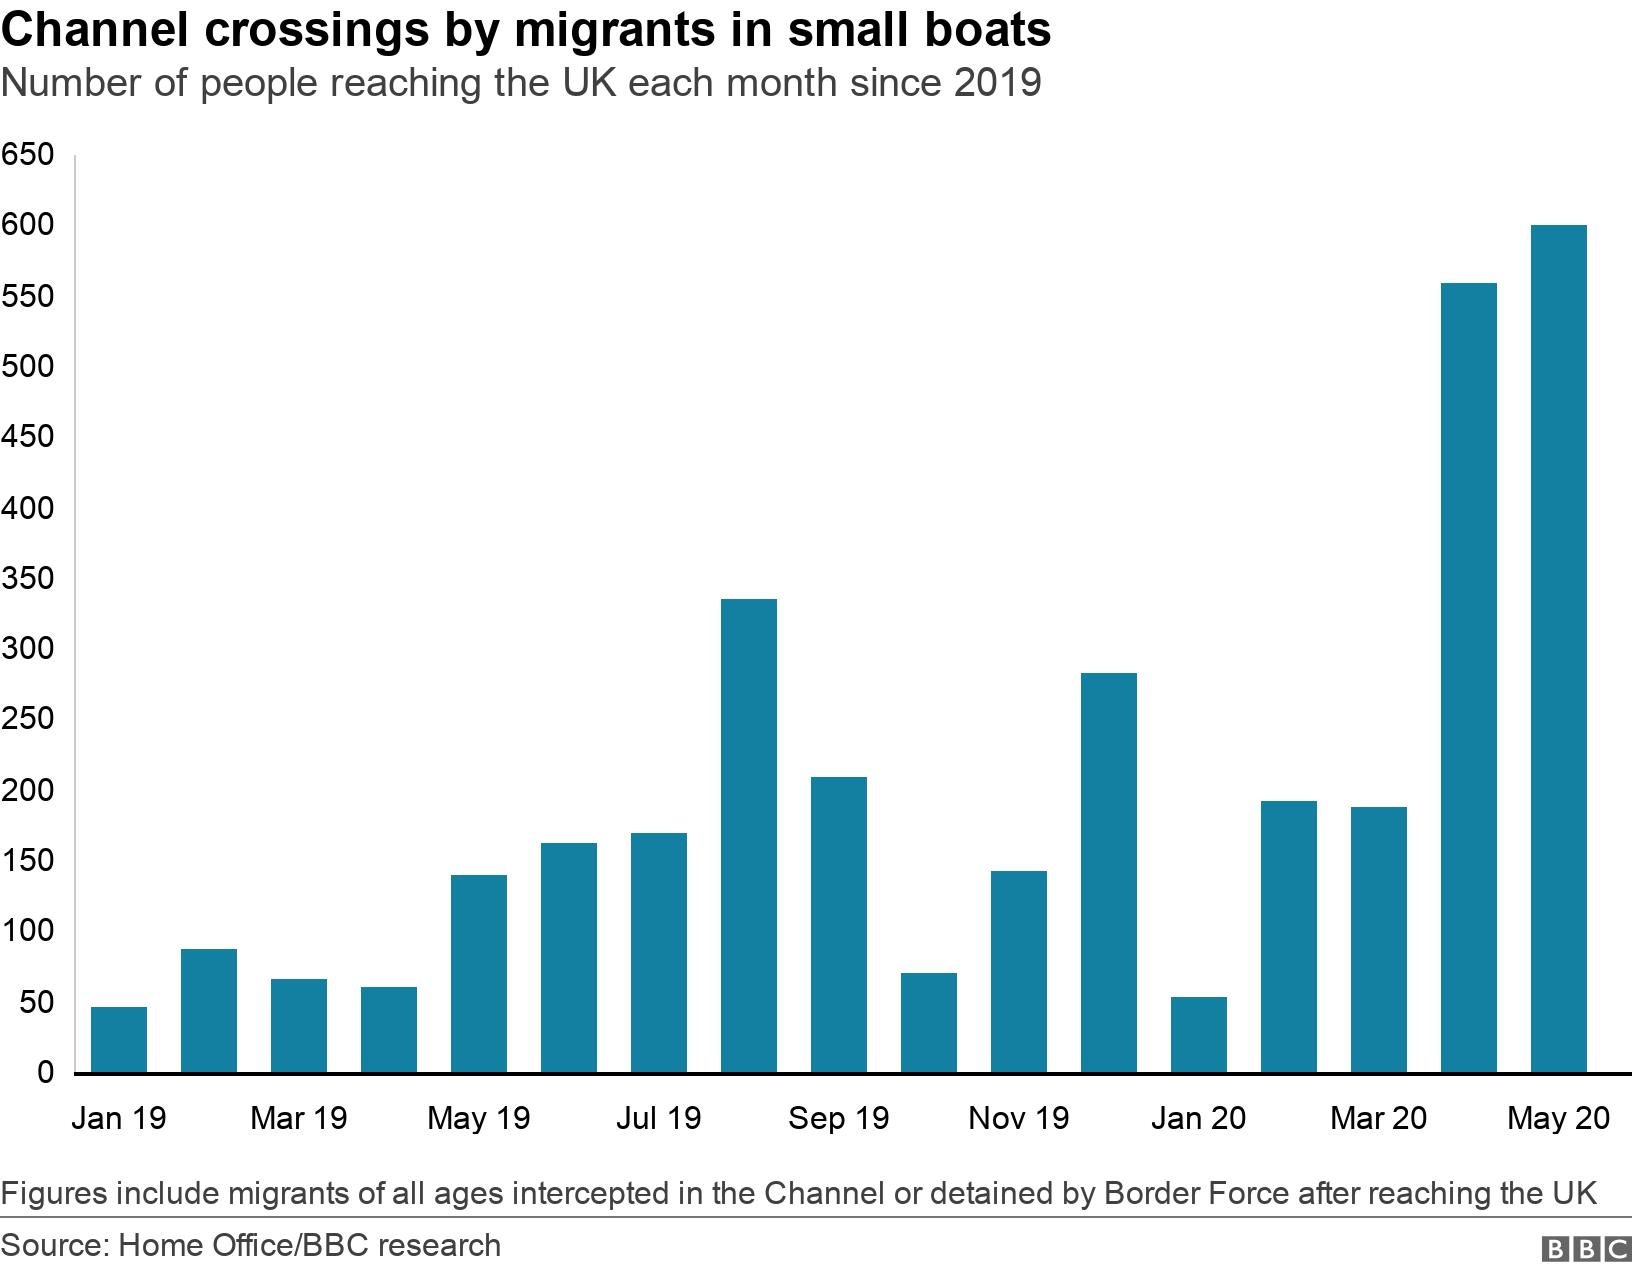 Channel crossings by migrants in small boats. Number of people reaching the UK each month since 2019. Figures include migrants of all ages intercepted in the Channel or detained by Border Force after reaching the UK.